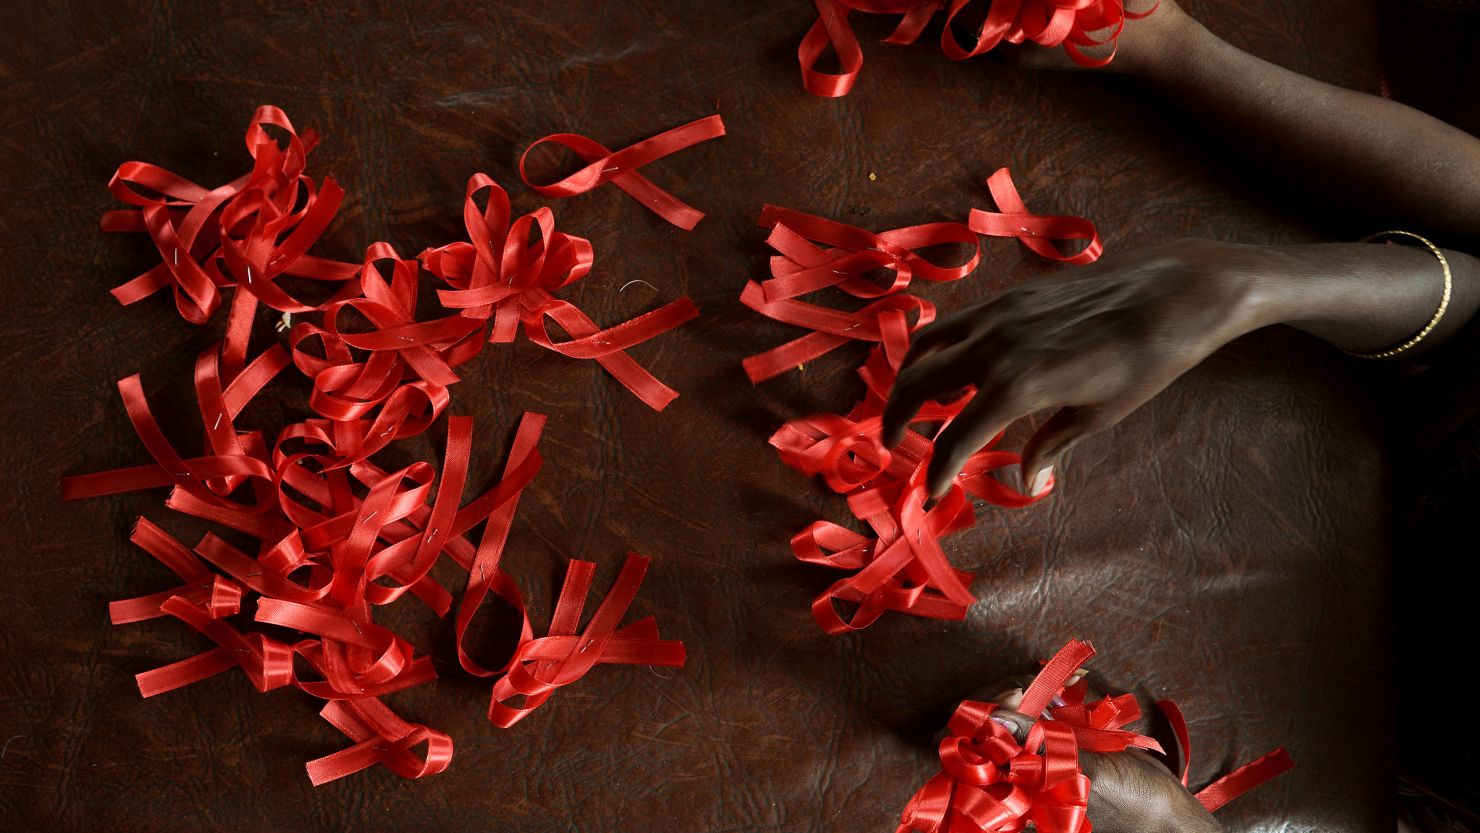 Experts are hailing a new development as a potentially important step in the fight against HIV.